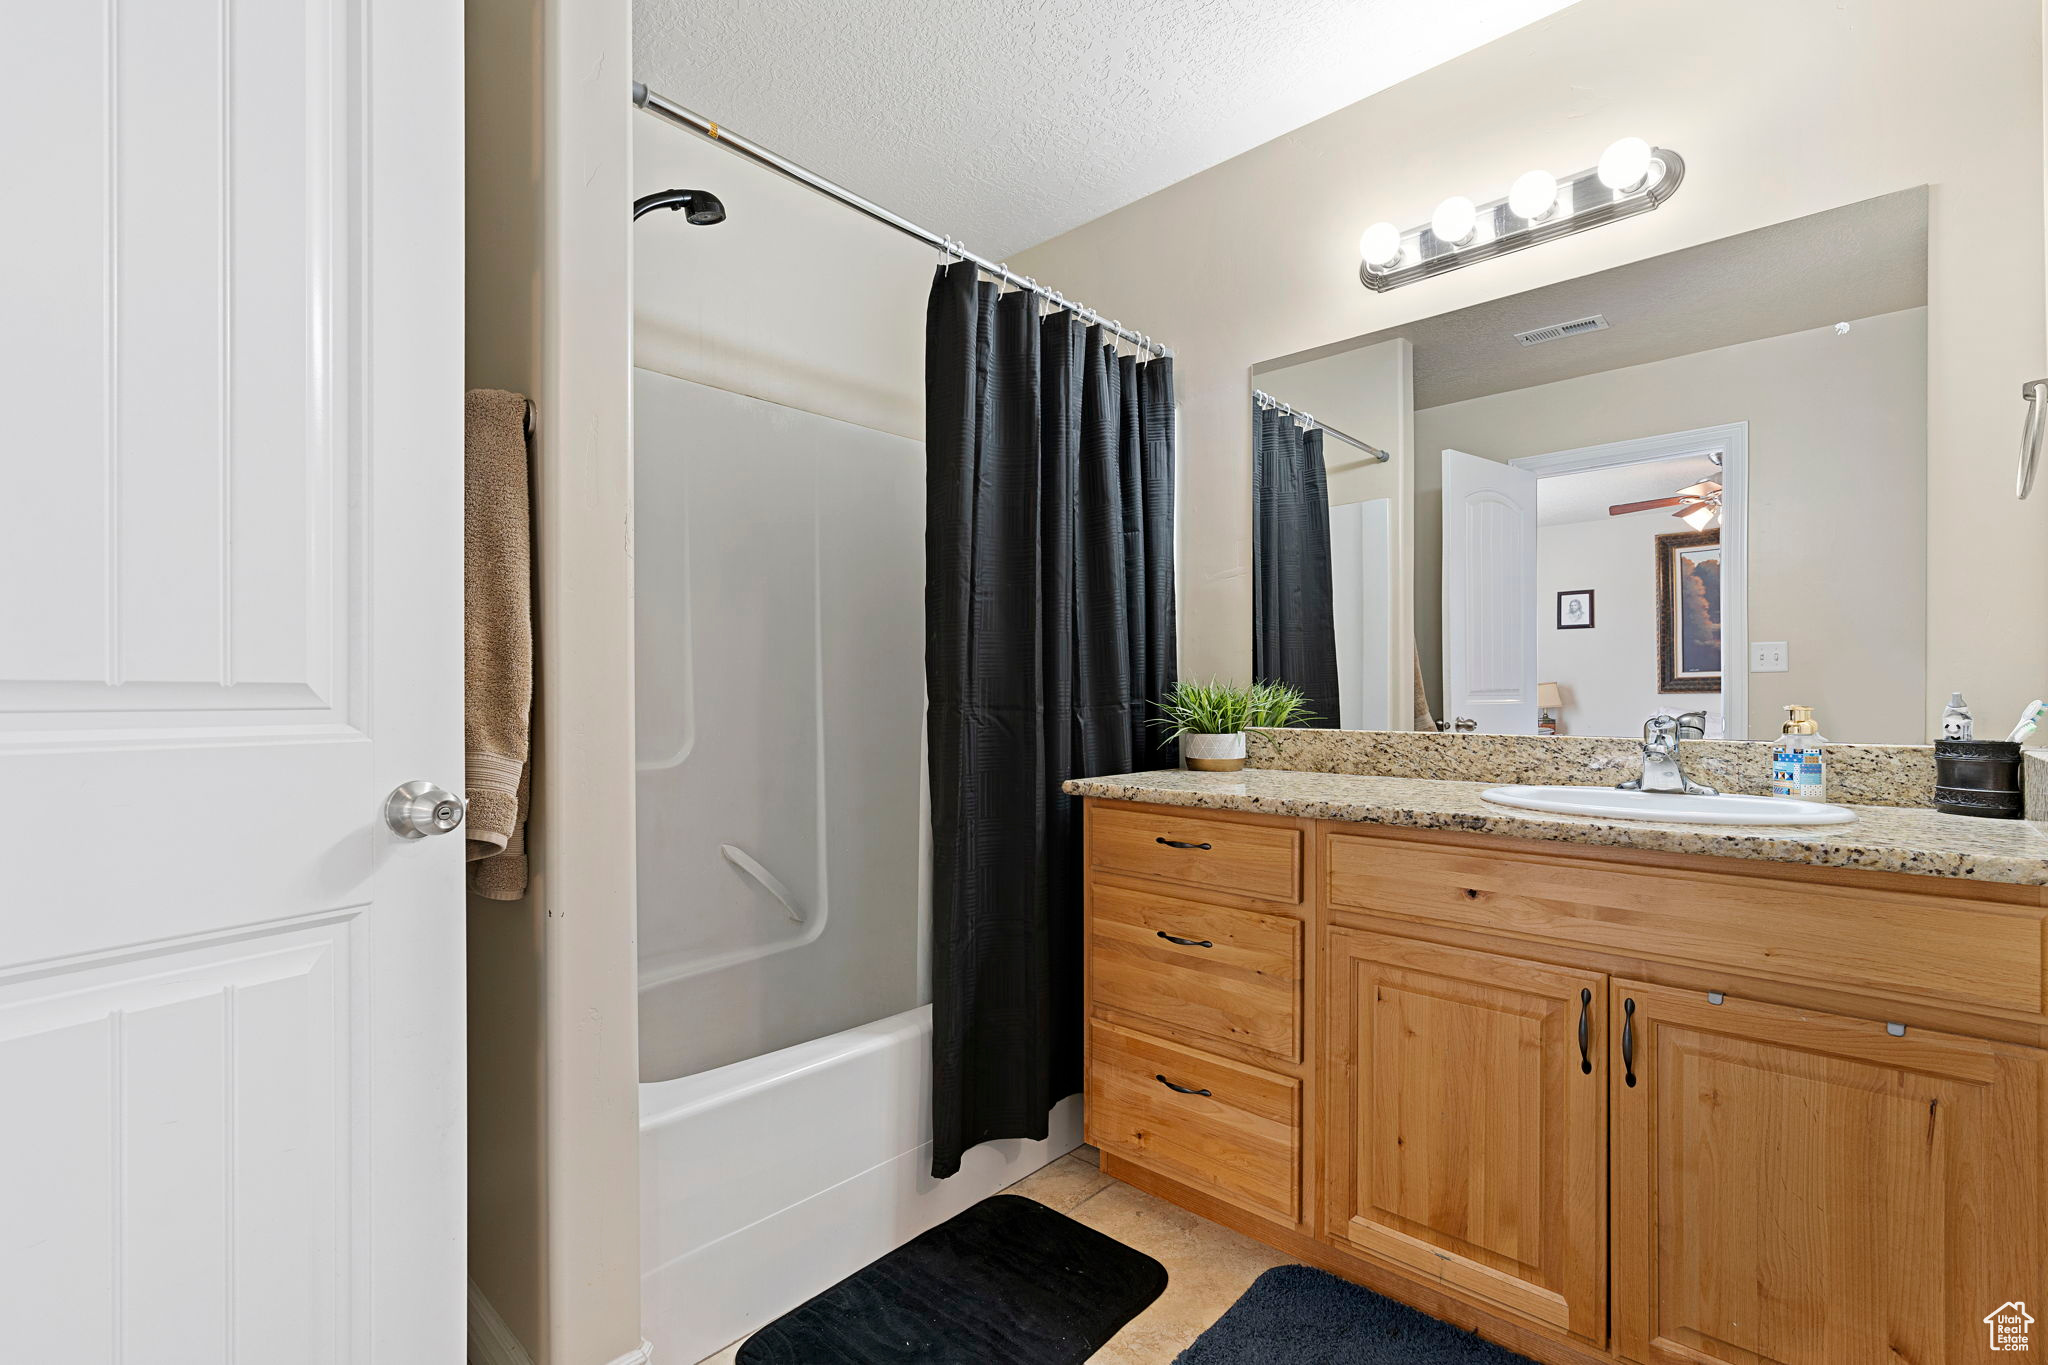 Bathroom with vanity, a textured ceiling, tile floors, ceiling fan, and shower / tub combo